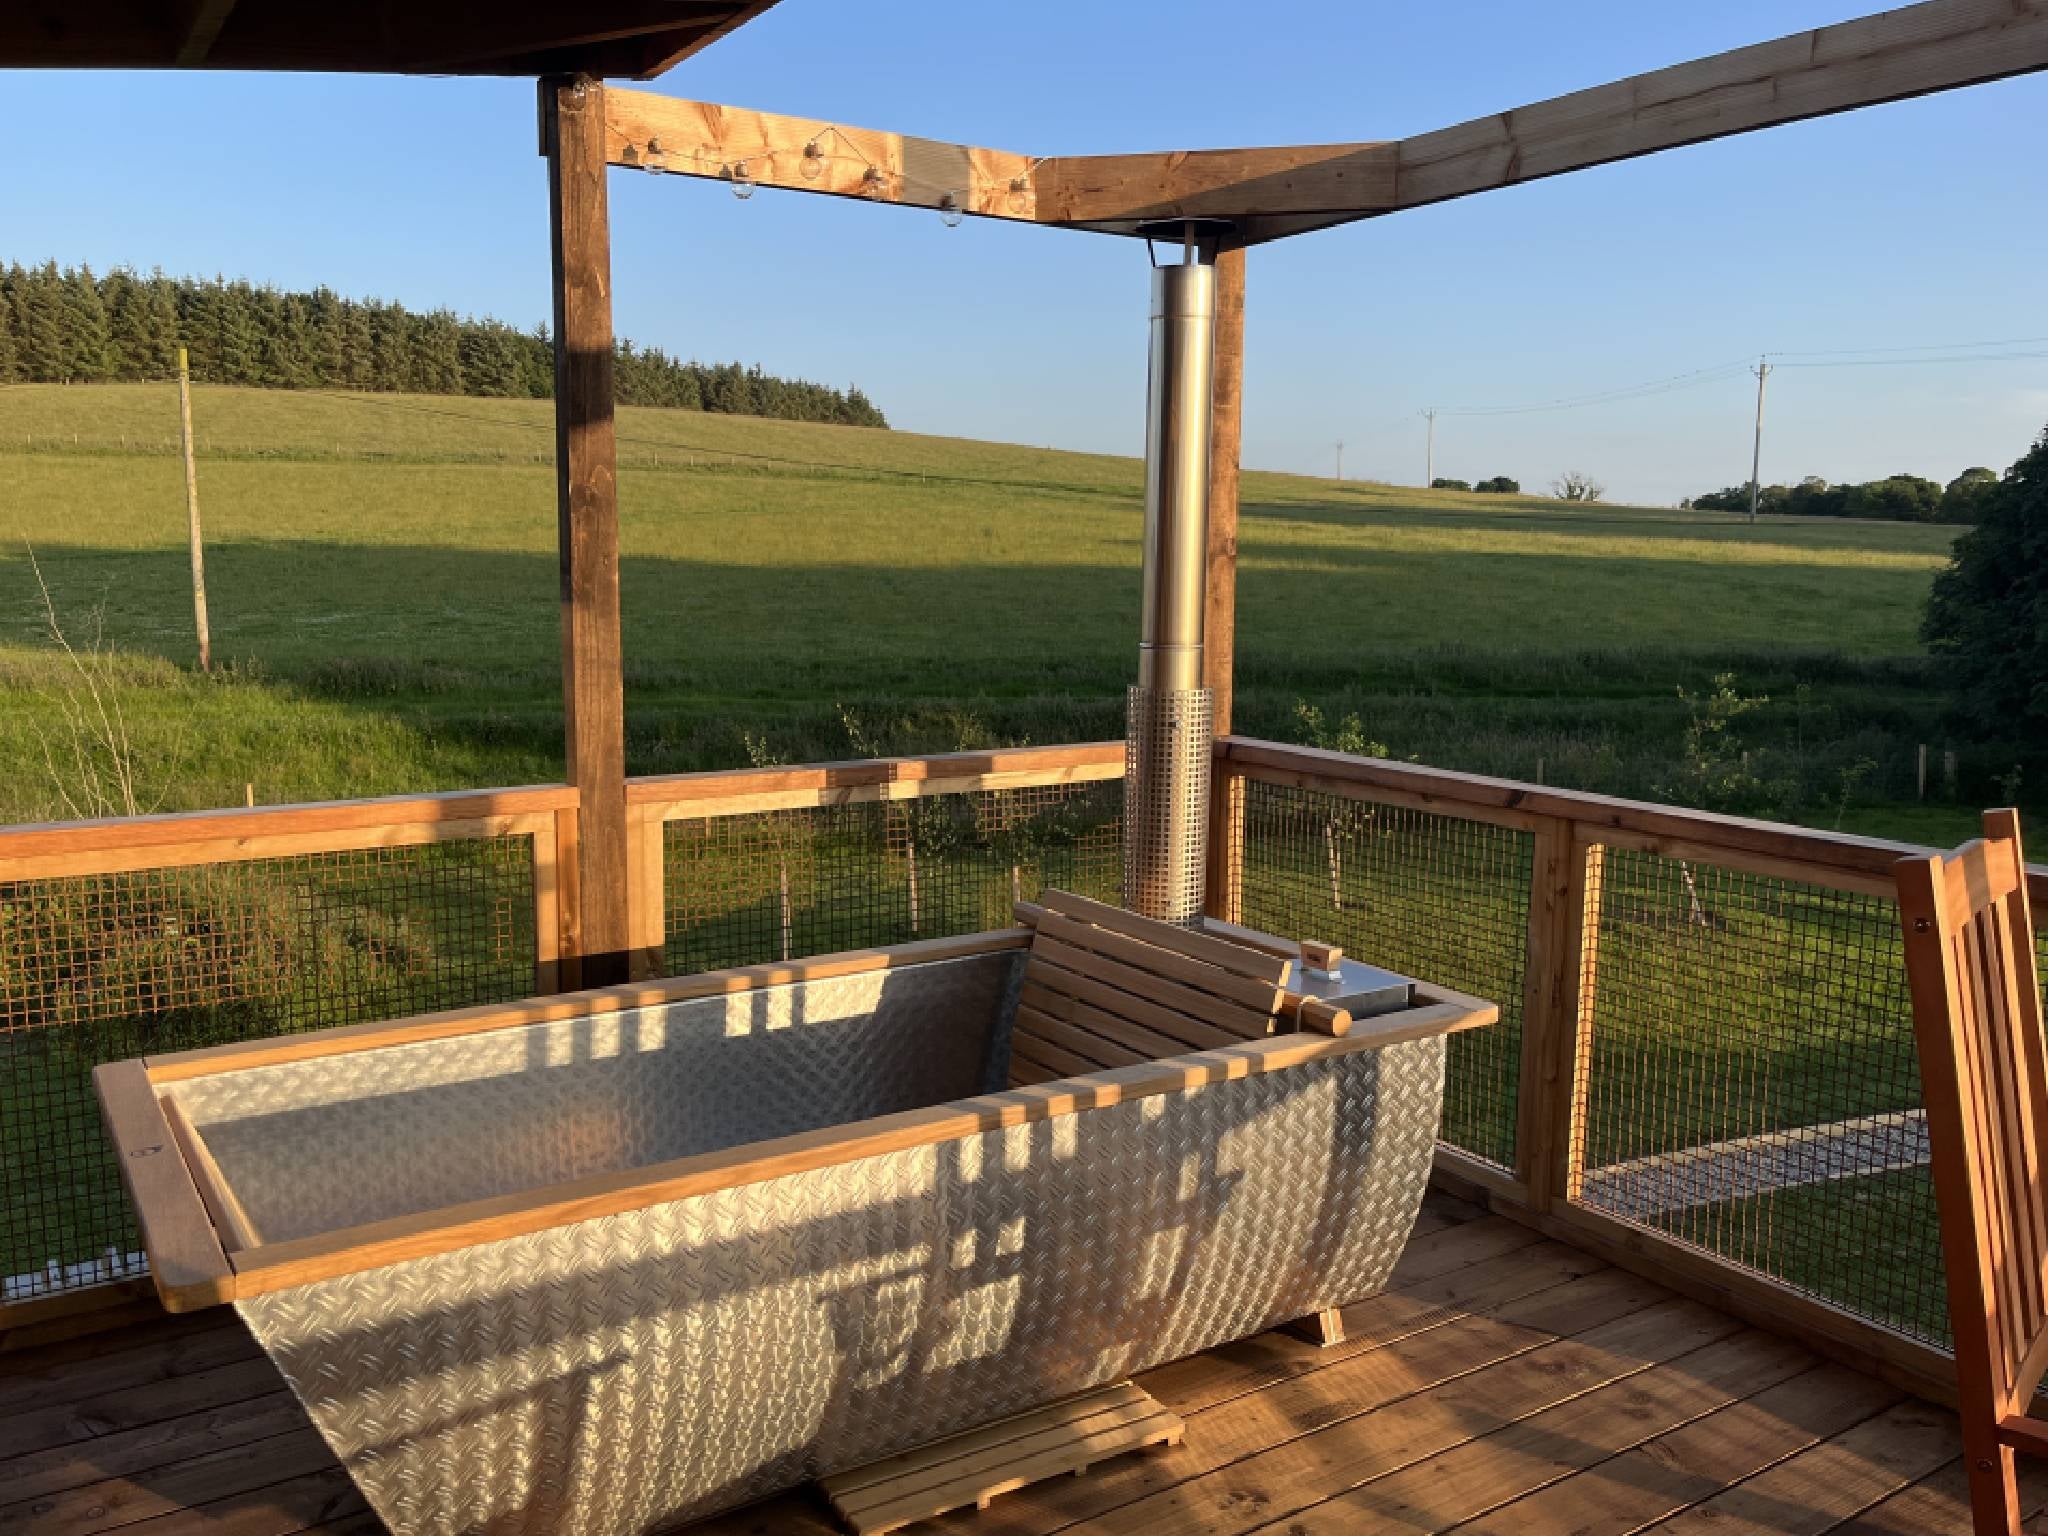 The wood fired bath is perfectly positioned for taking a sunset dip